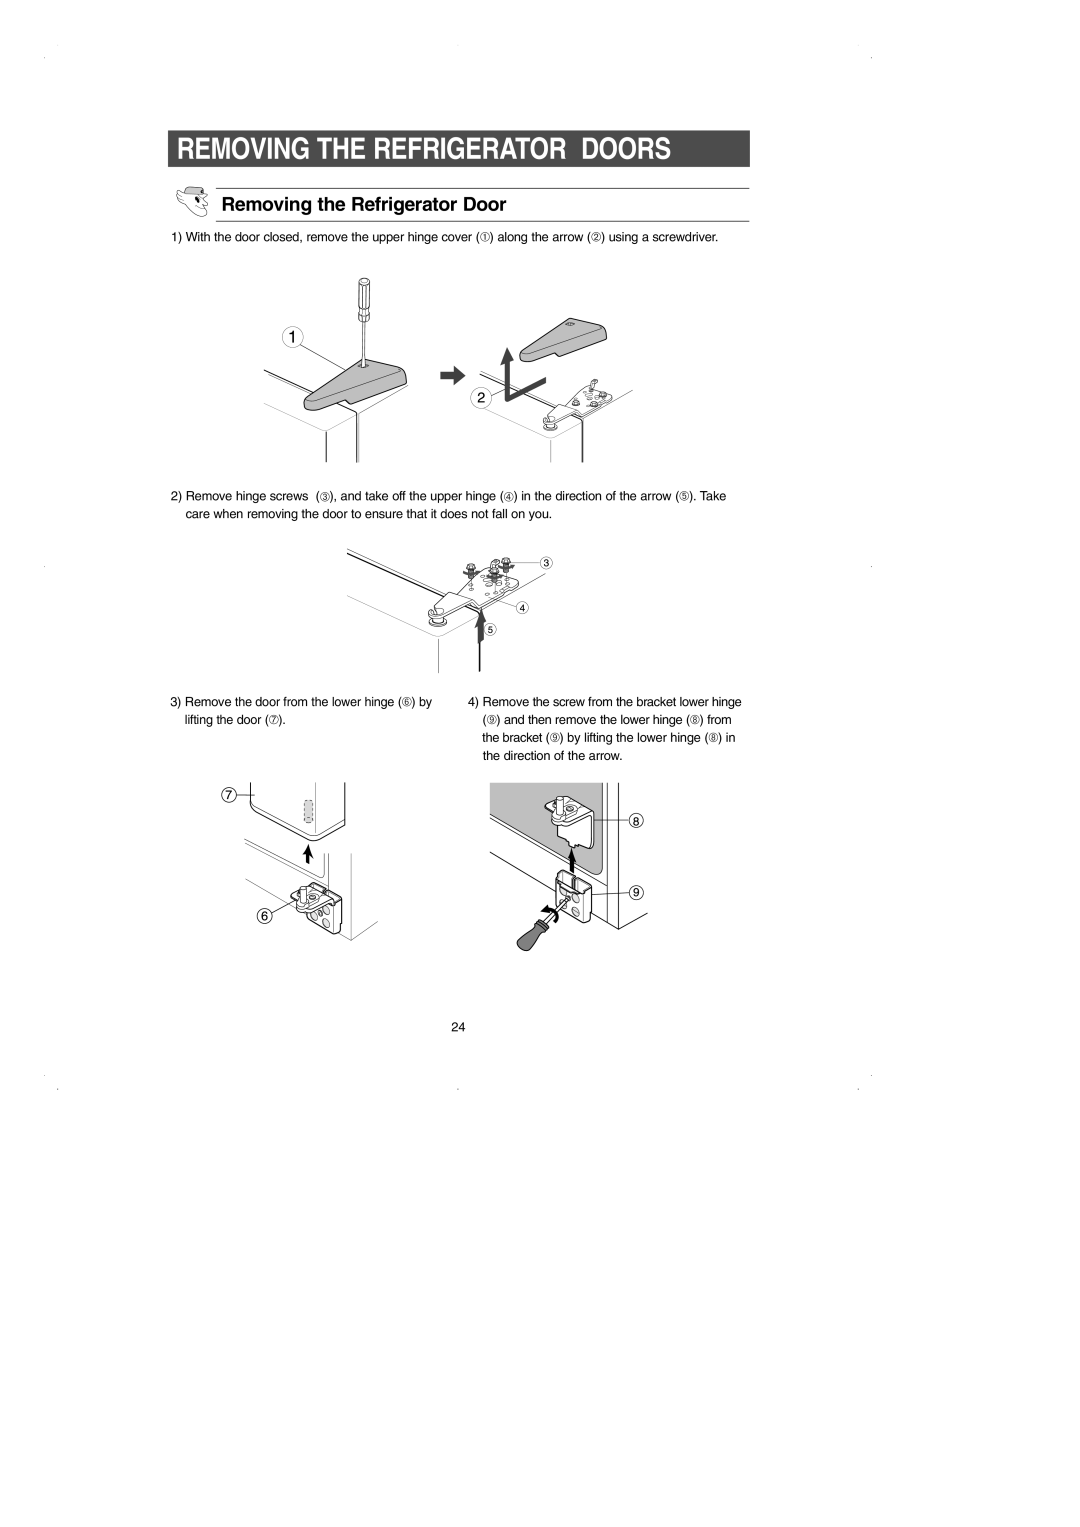 Samsung RS2531 installation instructions Removing the Refrigerator Door, Removing The Refrigerator Doors 